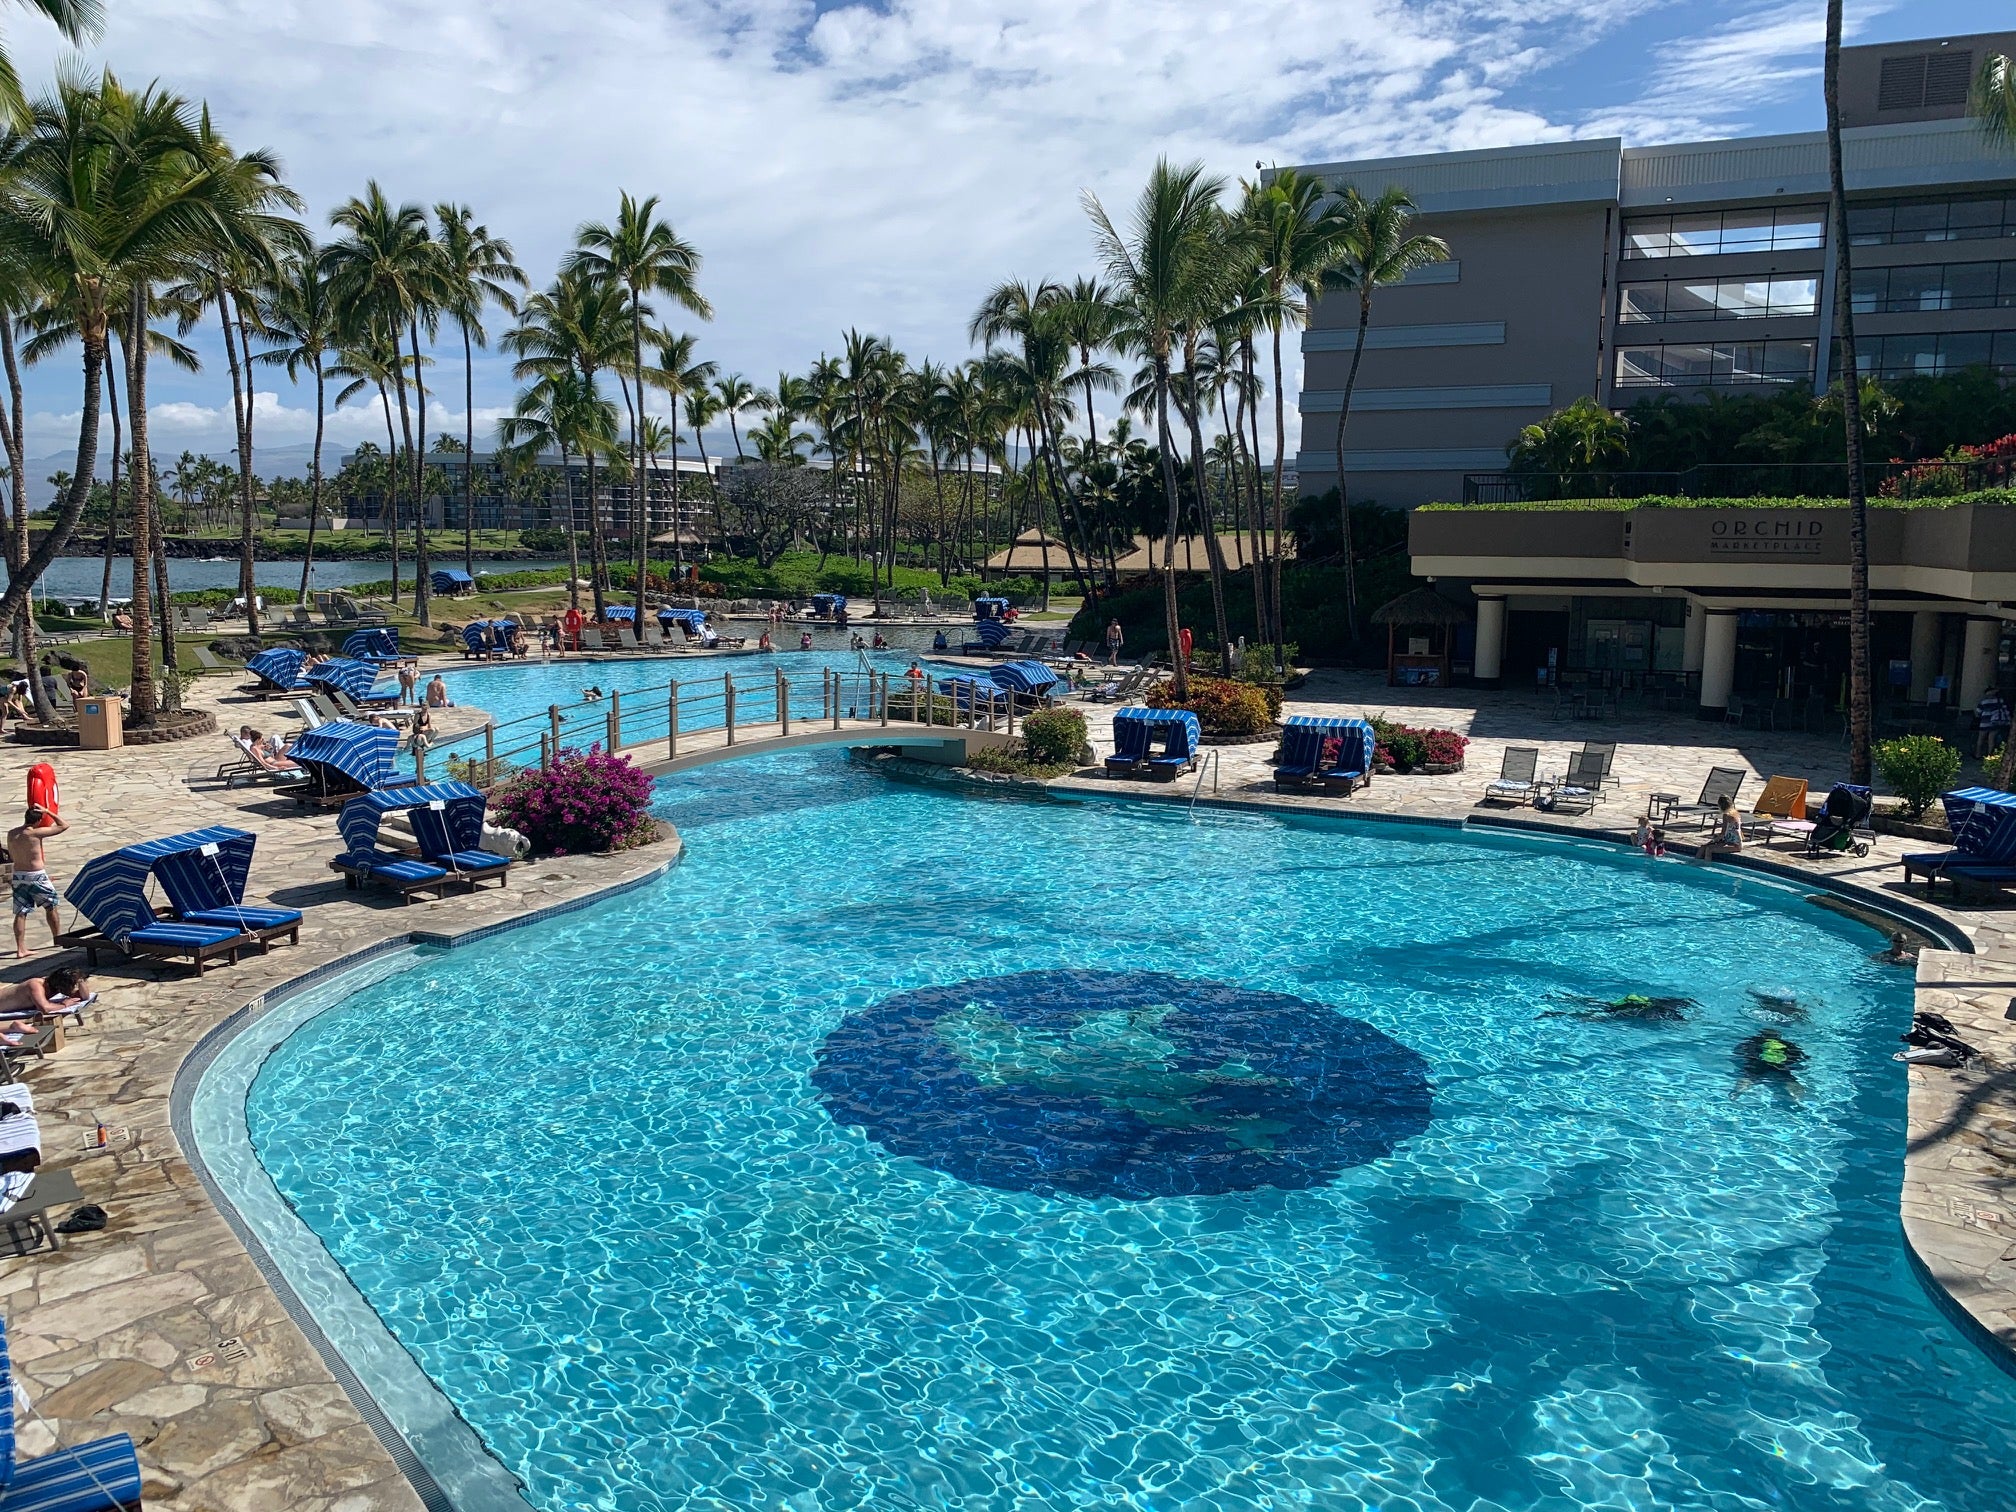 Hilton Waikoloa Village pool March 2021. (Photo by Clint Henderson:The Points Guy)